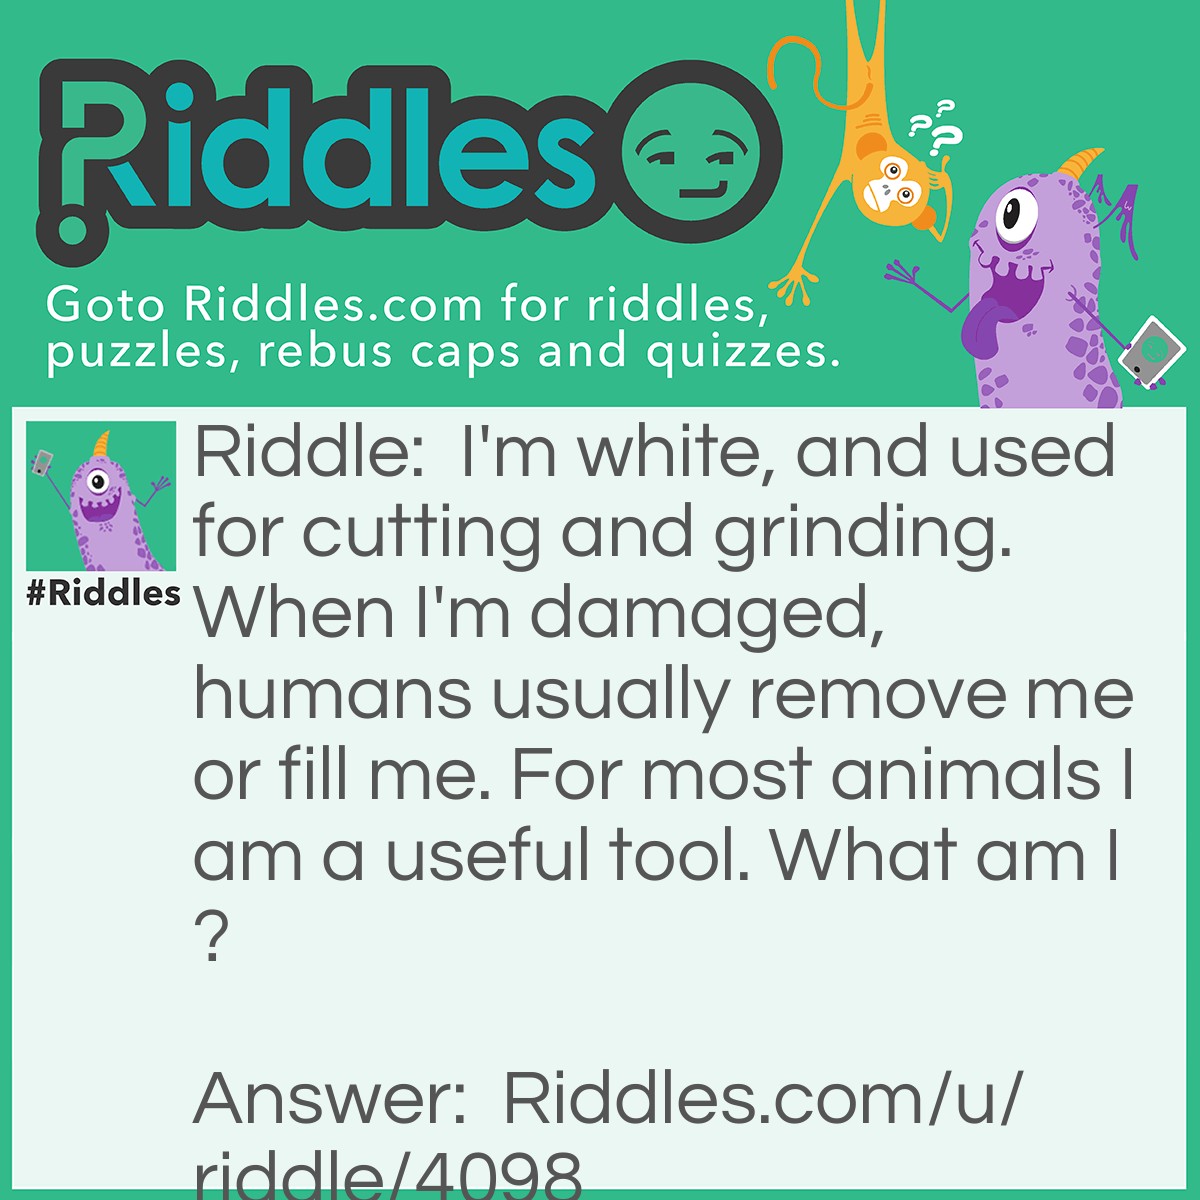 Riddle: I'm white, and used for cutting and grinding. When I'm damaged, humans usually remove me or fill me. For most animals I am a useful tool. What am I? Answer: A tooth.